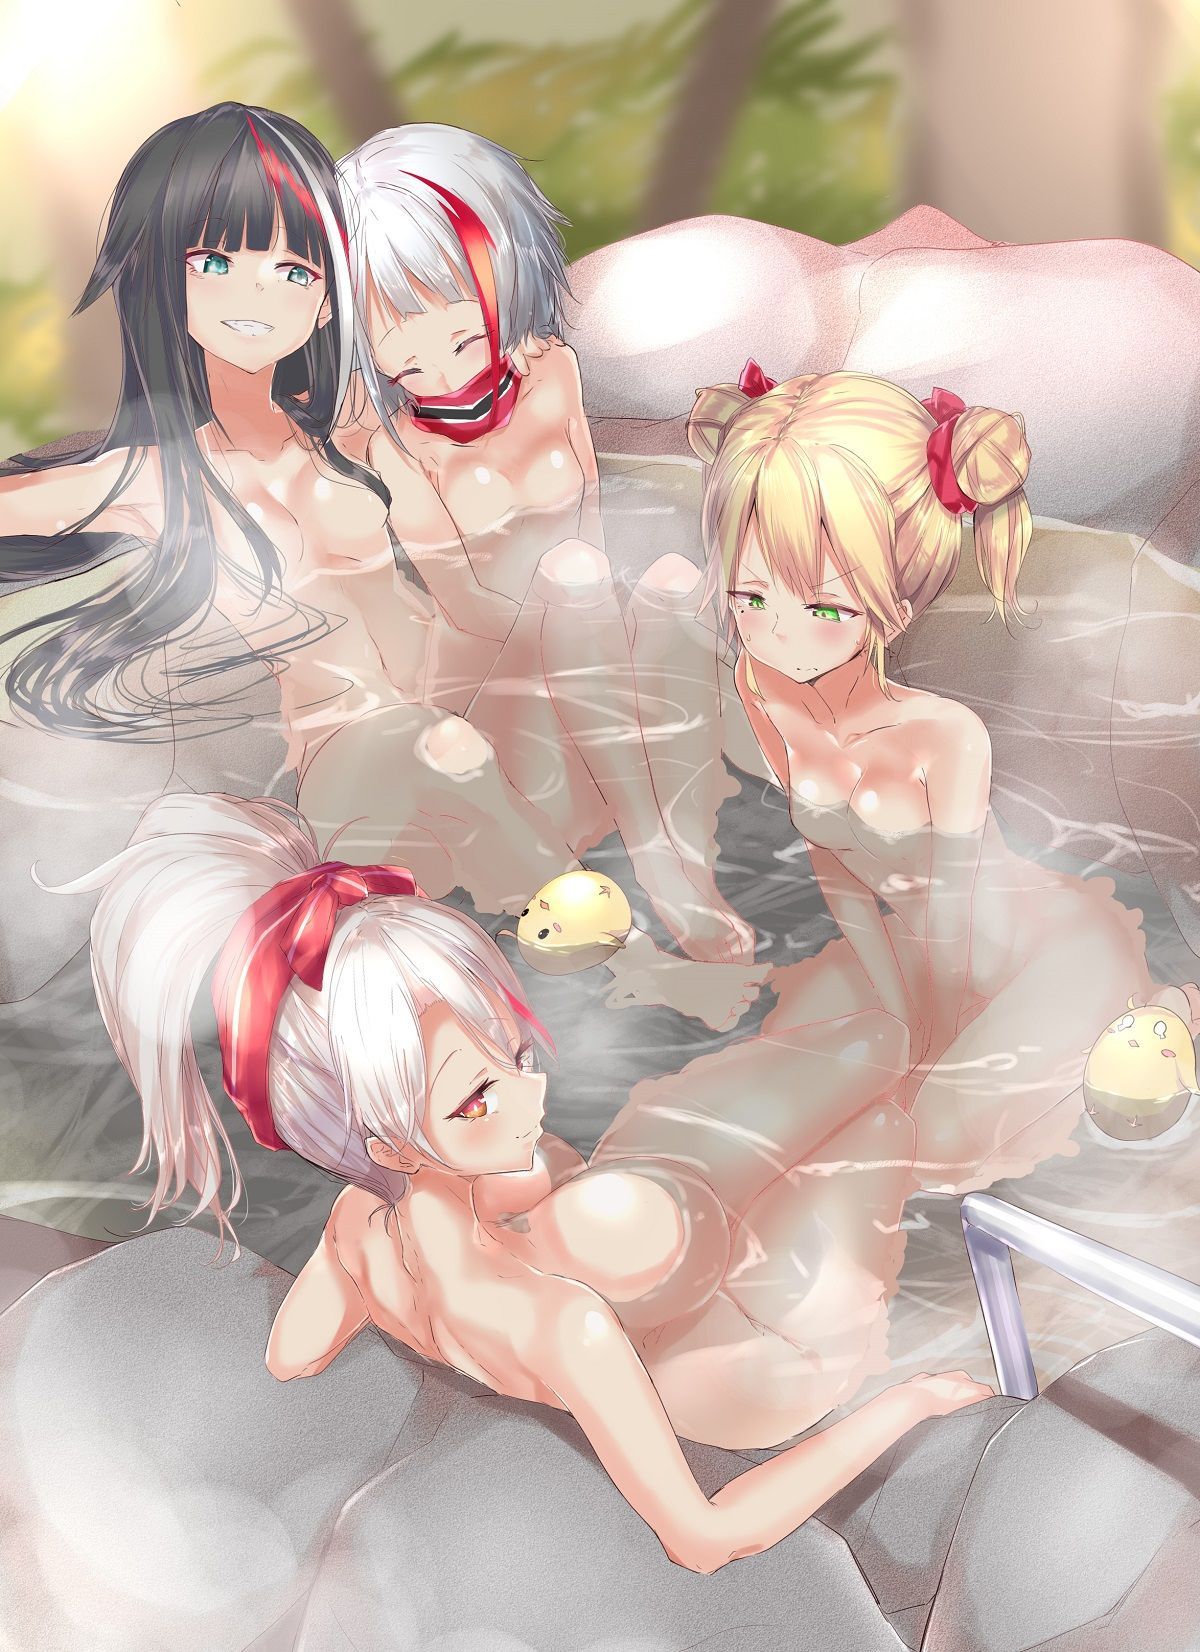 【Secondary erotic】 Click here for erotic images of girls in baths and hot springs where nudes can be worshiped 19